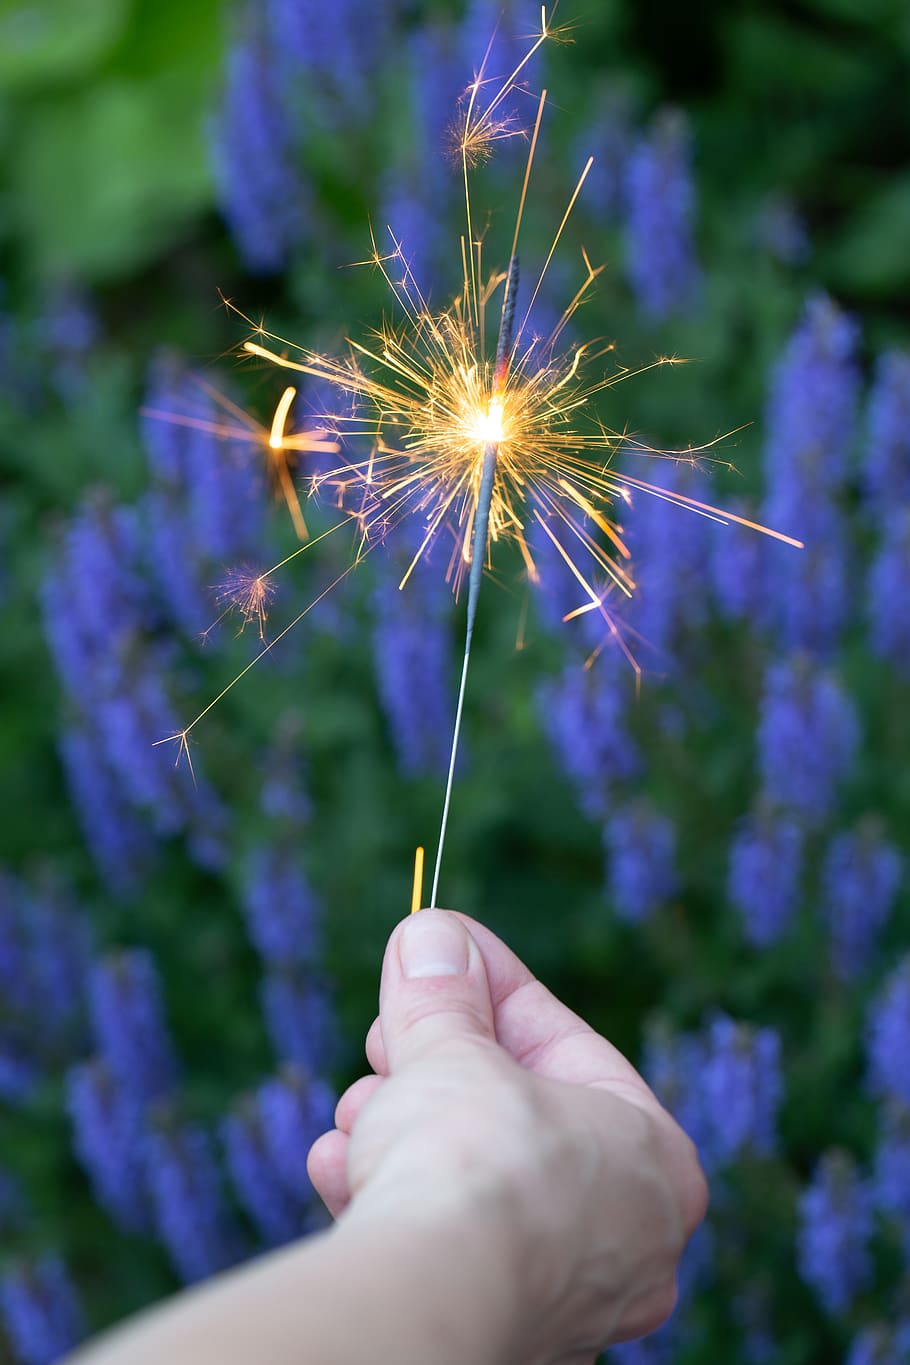 sparklers, fireworks, holiday, celebration, flowers, bokeh, outdoors, summer, fun, hand